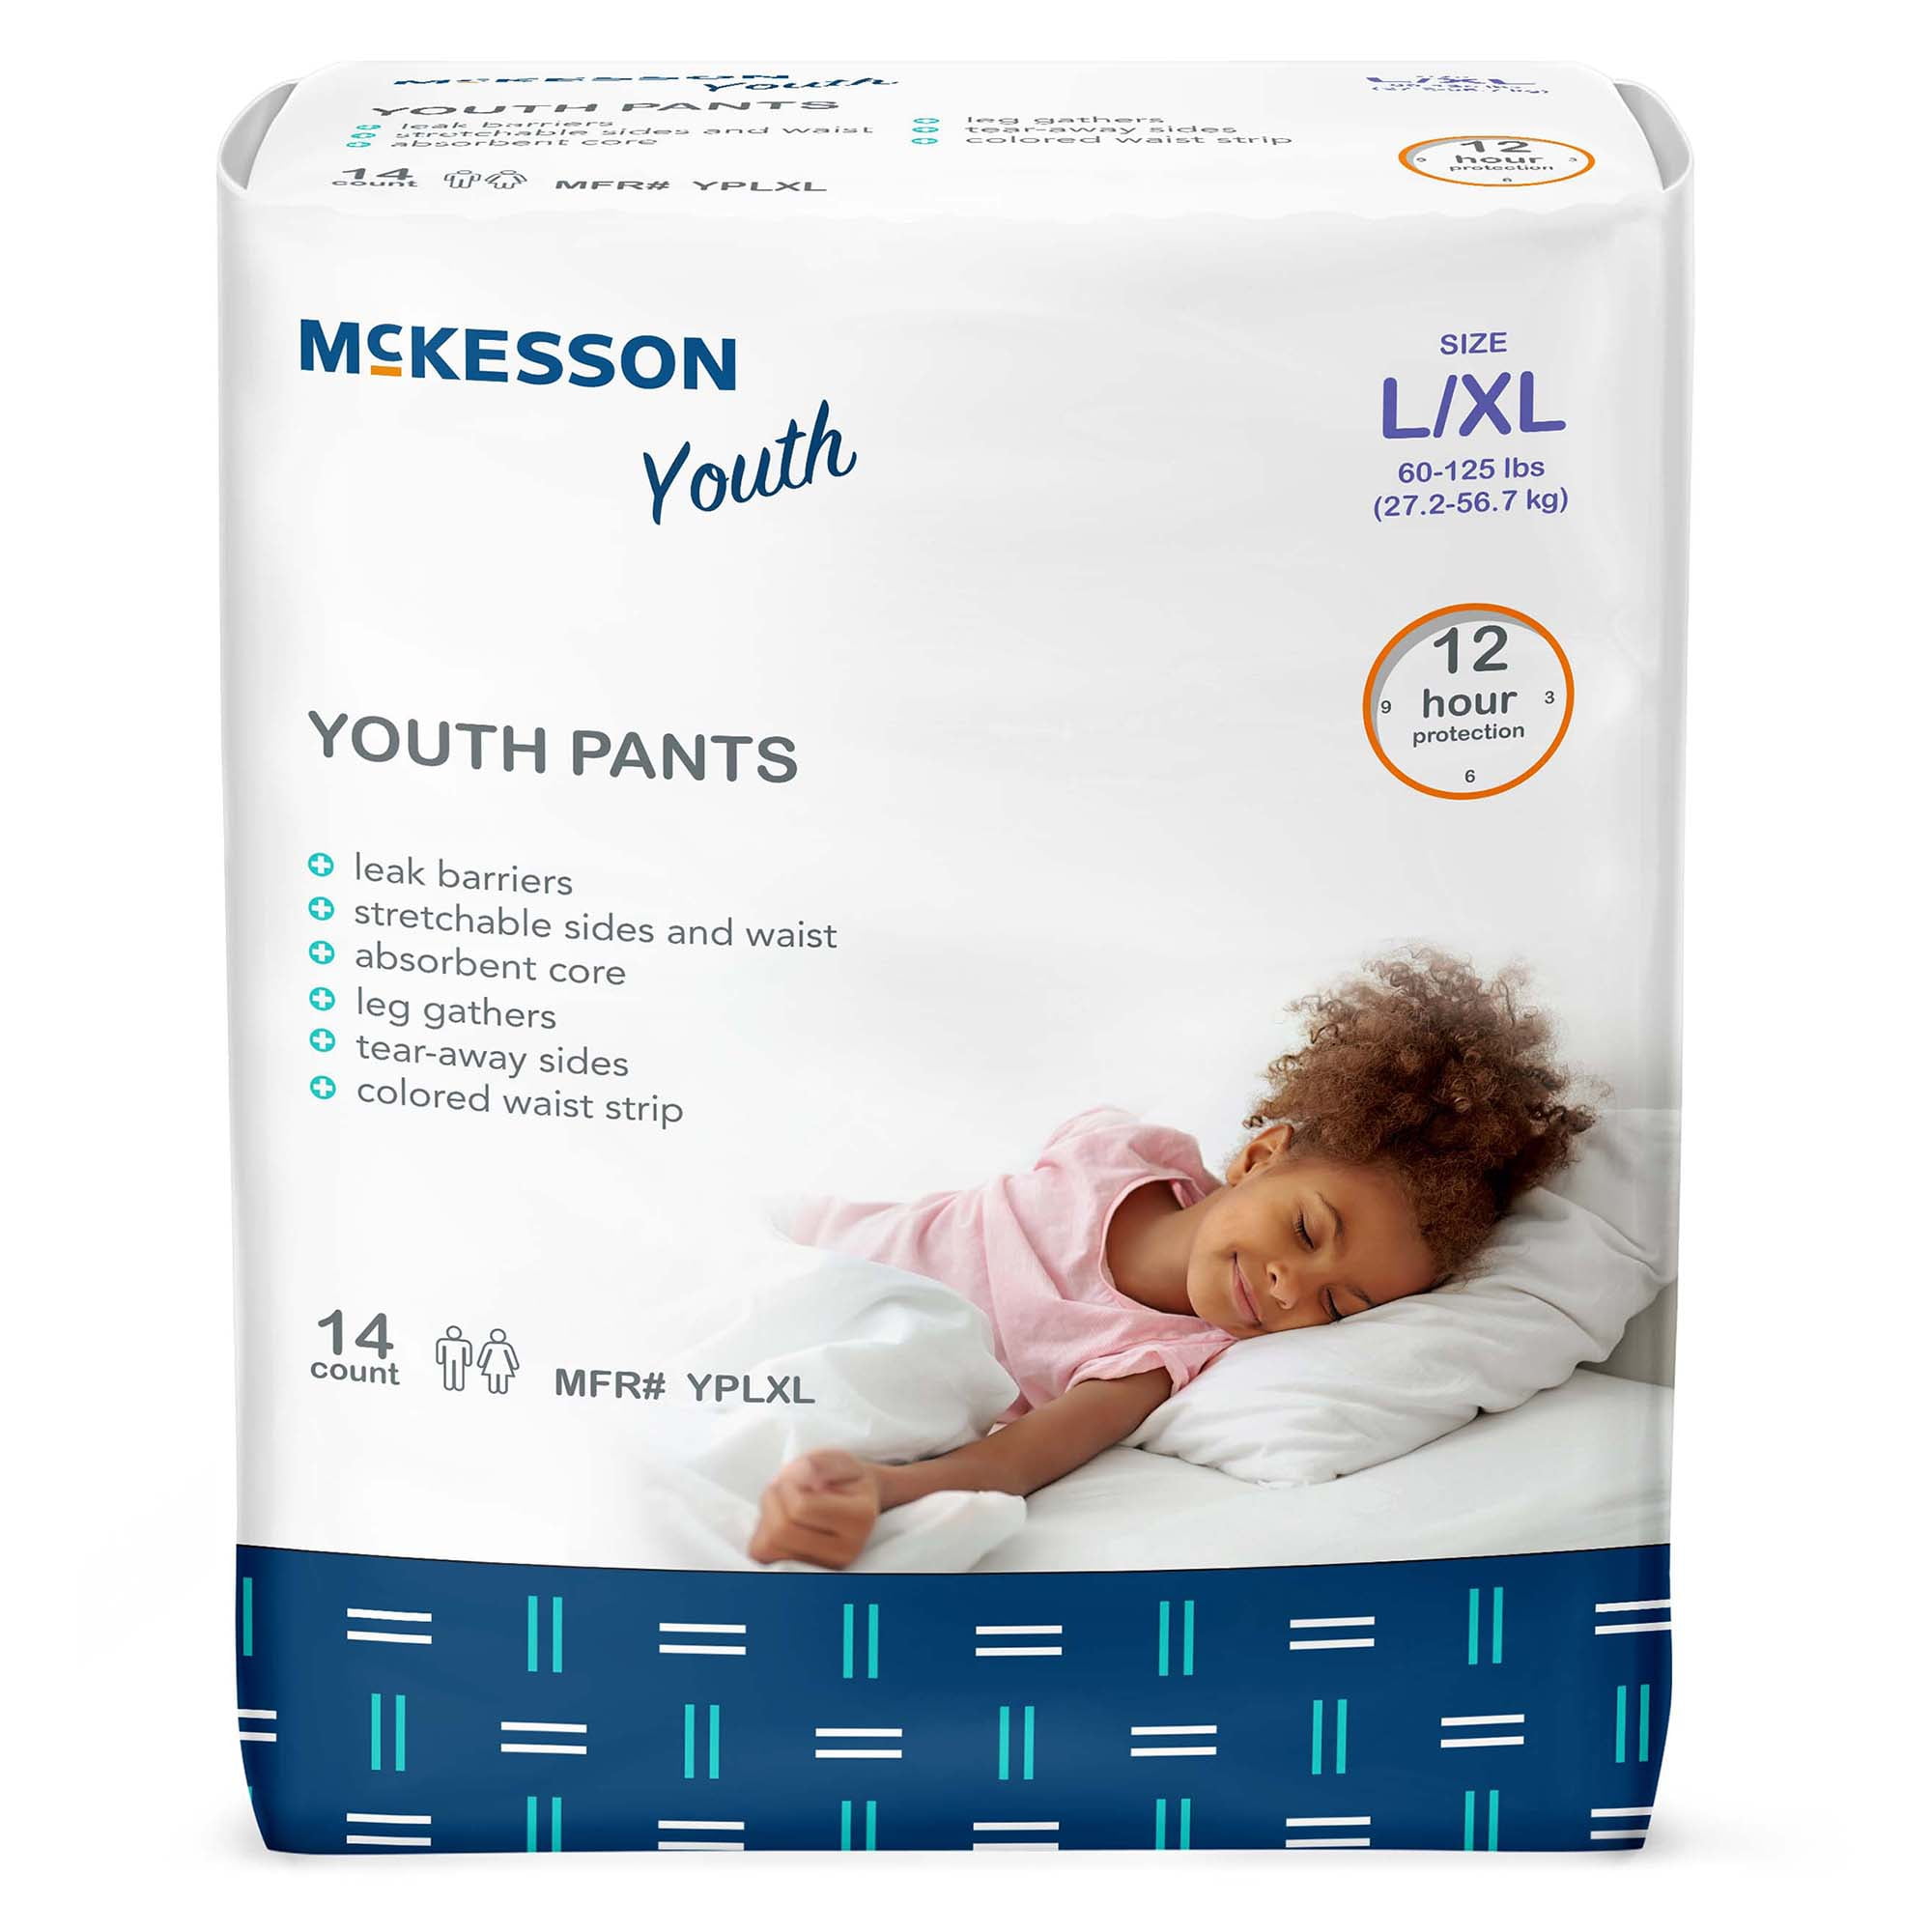 Pull-Ups Boys' Potty Training Pants, 4T-5T (38-50 lbs), 56 Count